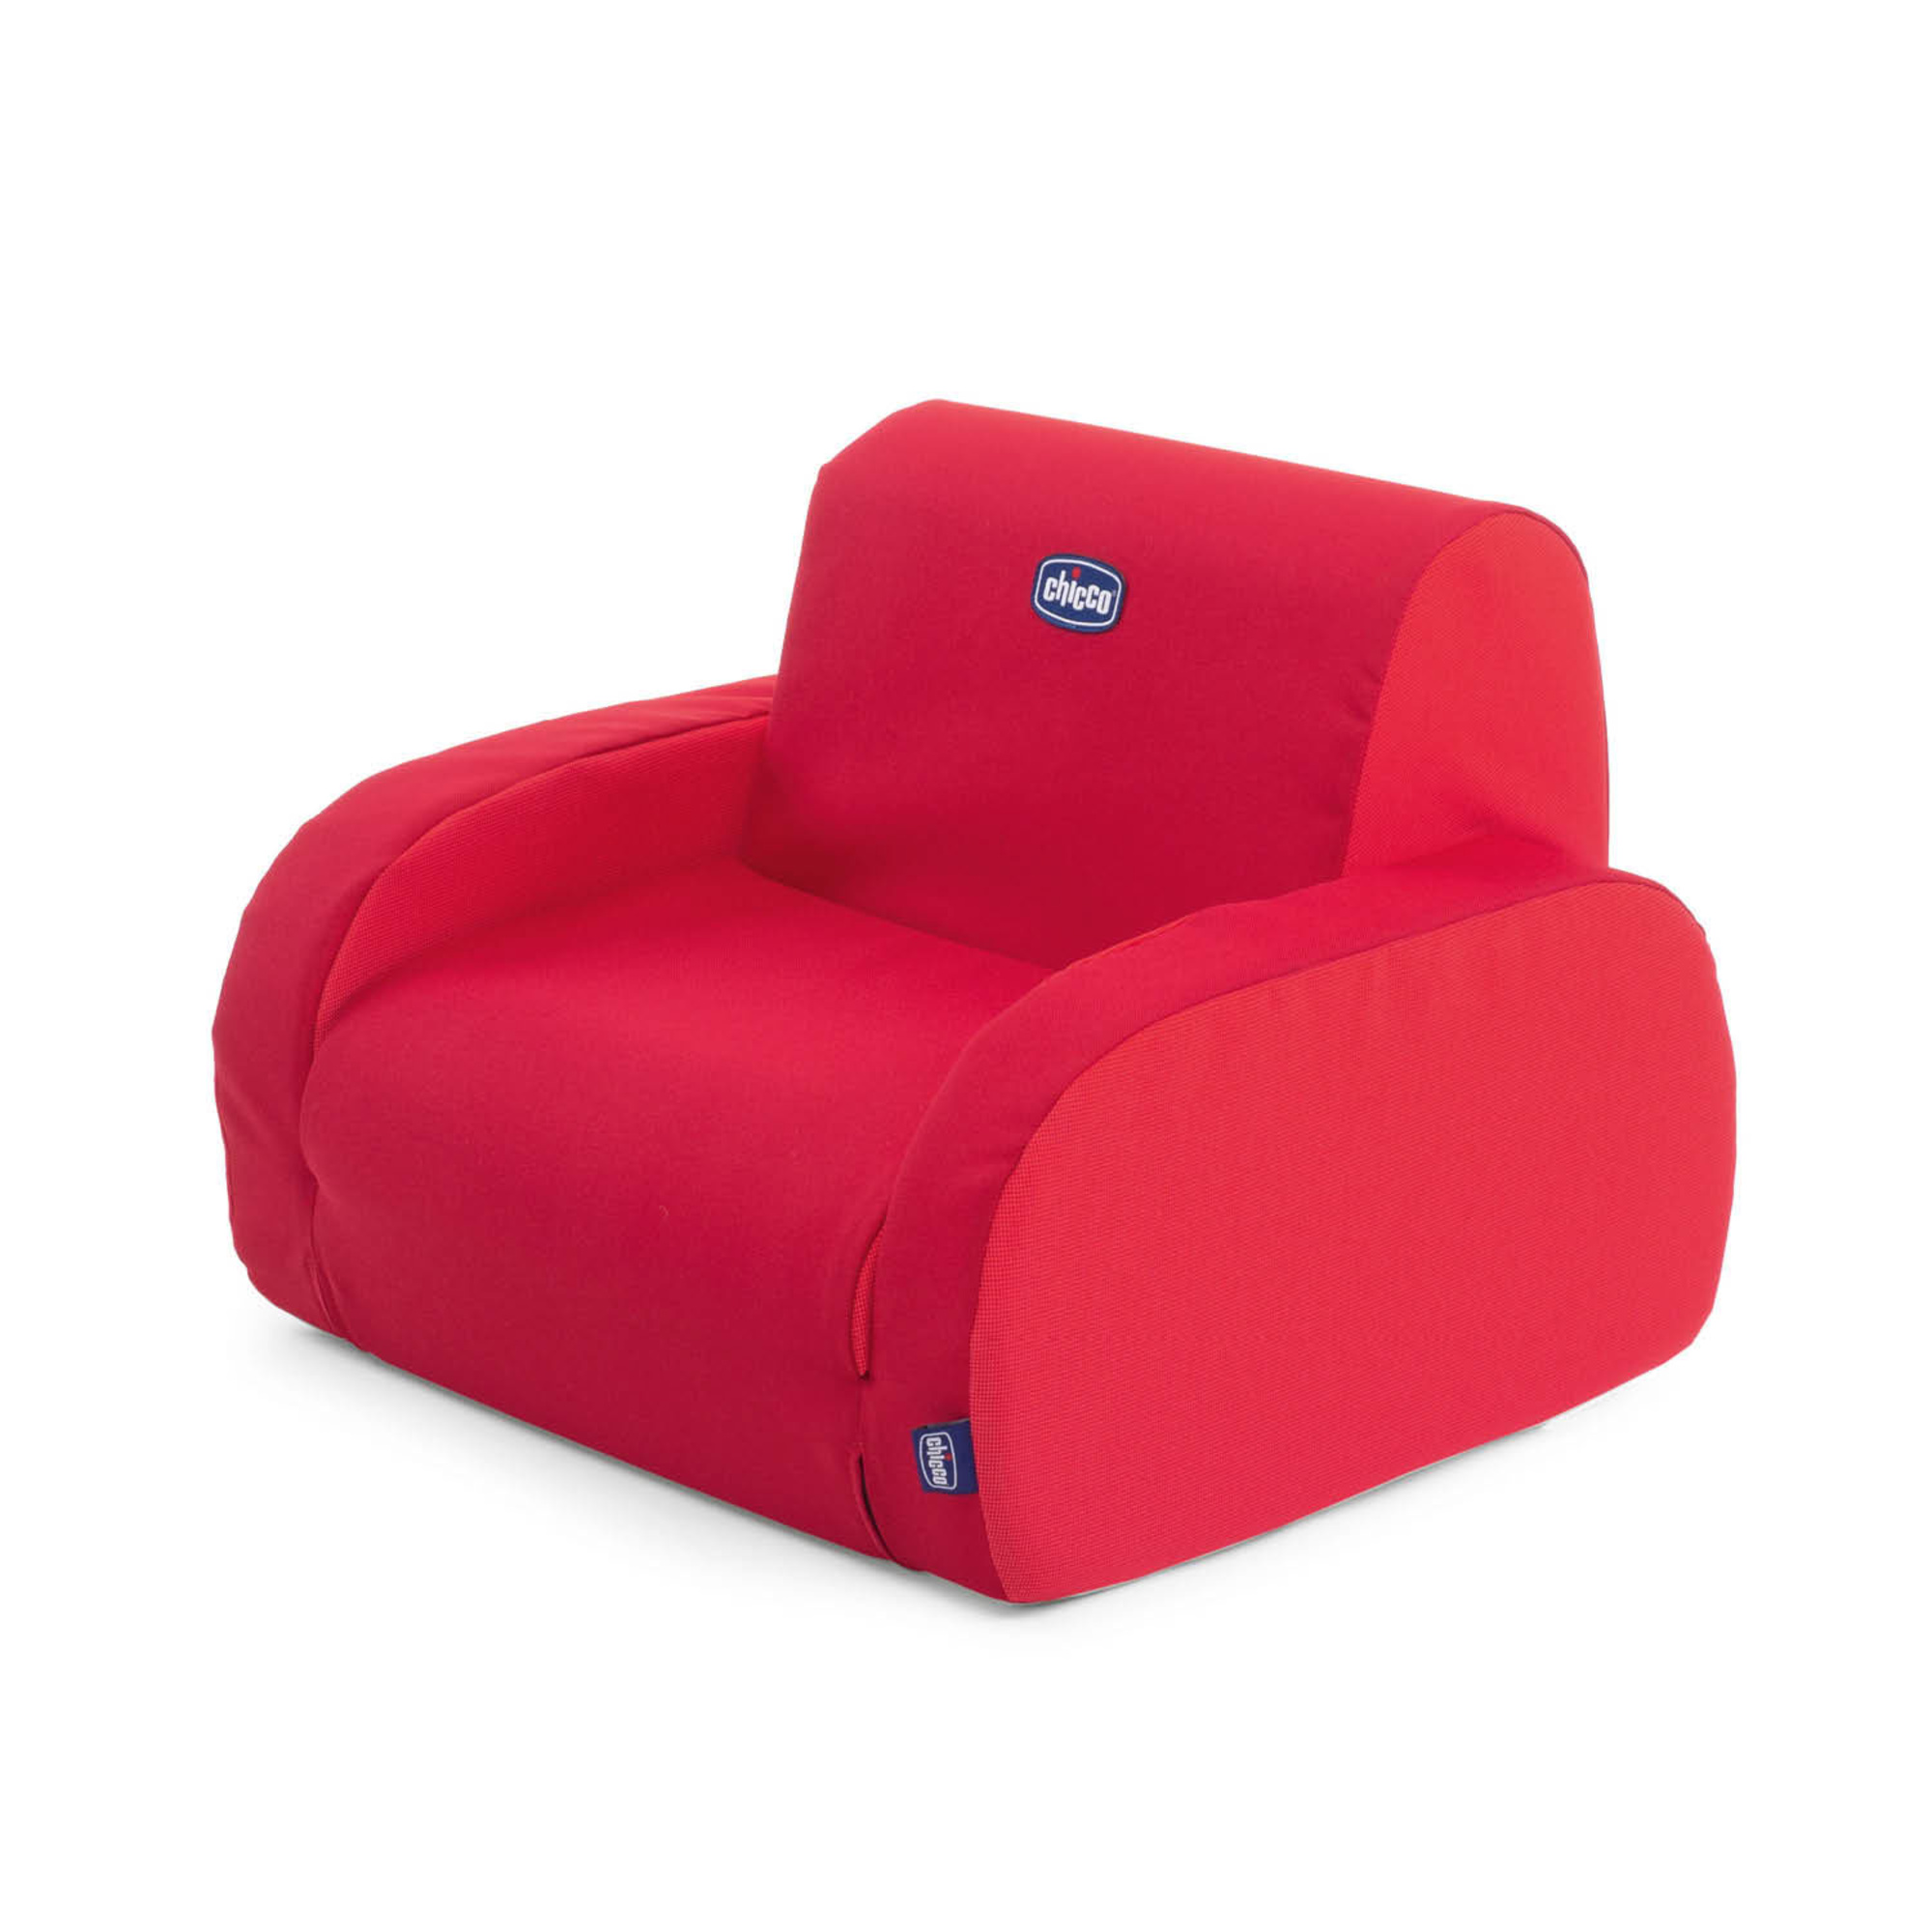 Chicco poltroncina twist - red - Chicco